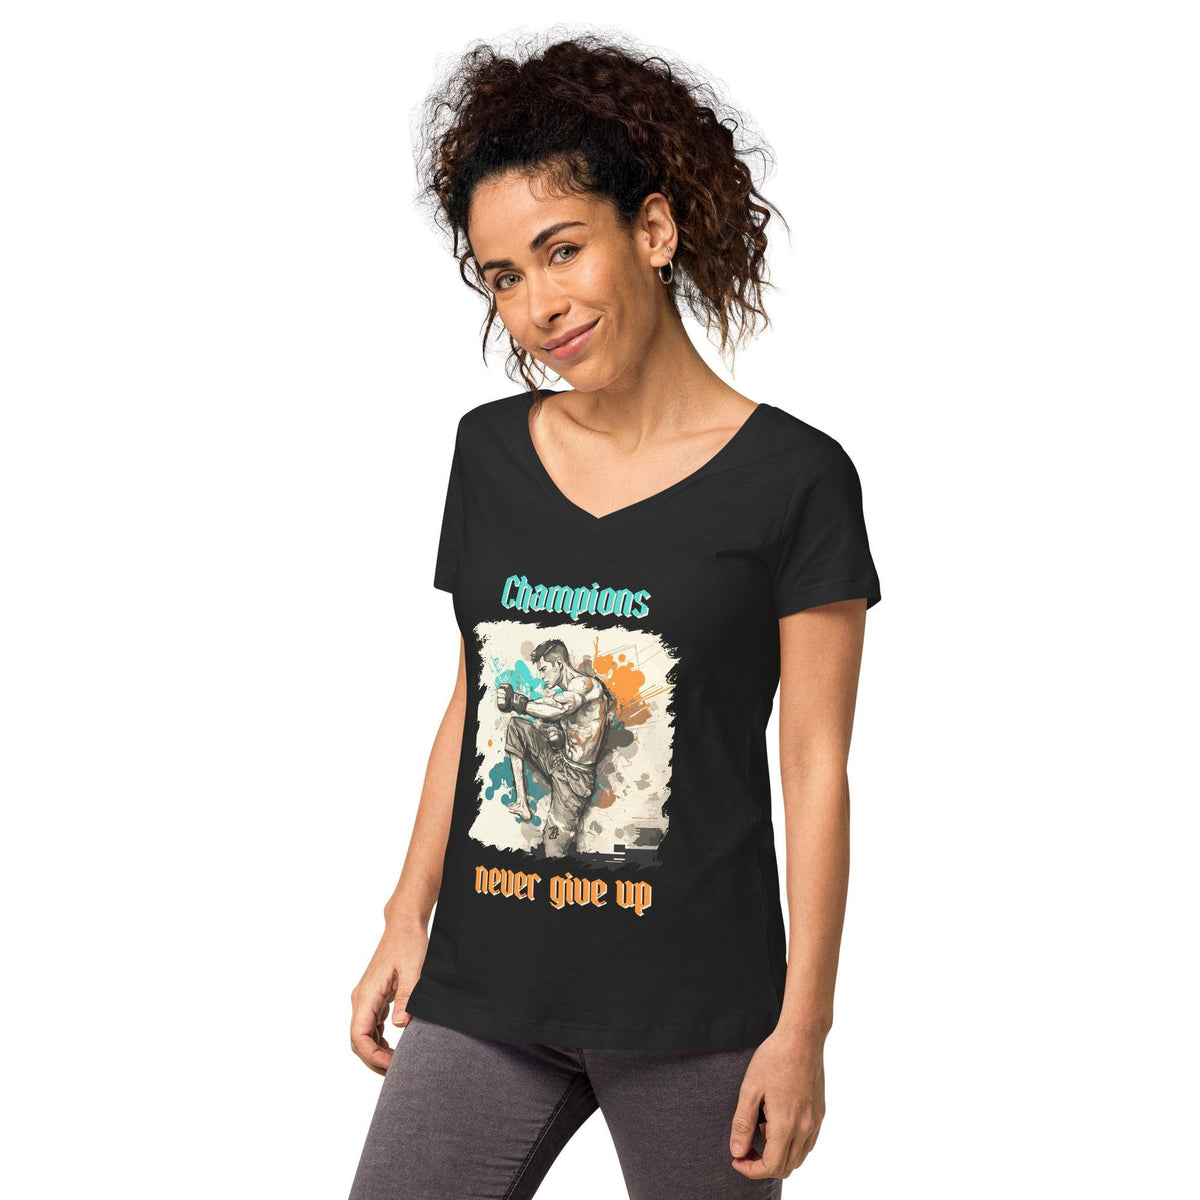 Champions Never Give Up Women’s Fitted V-neck T-shirt - Beyond T-shirts